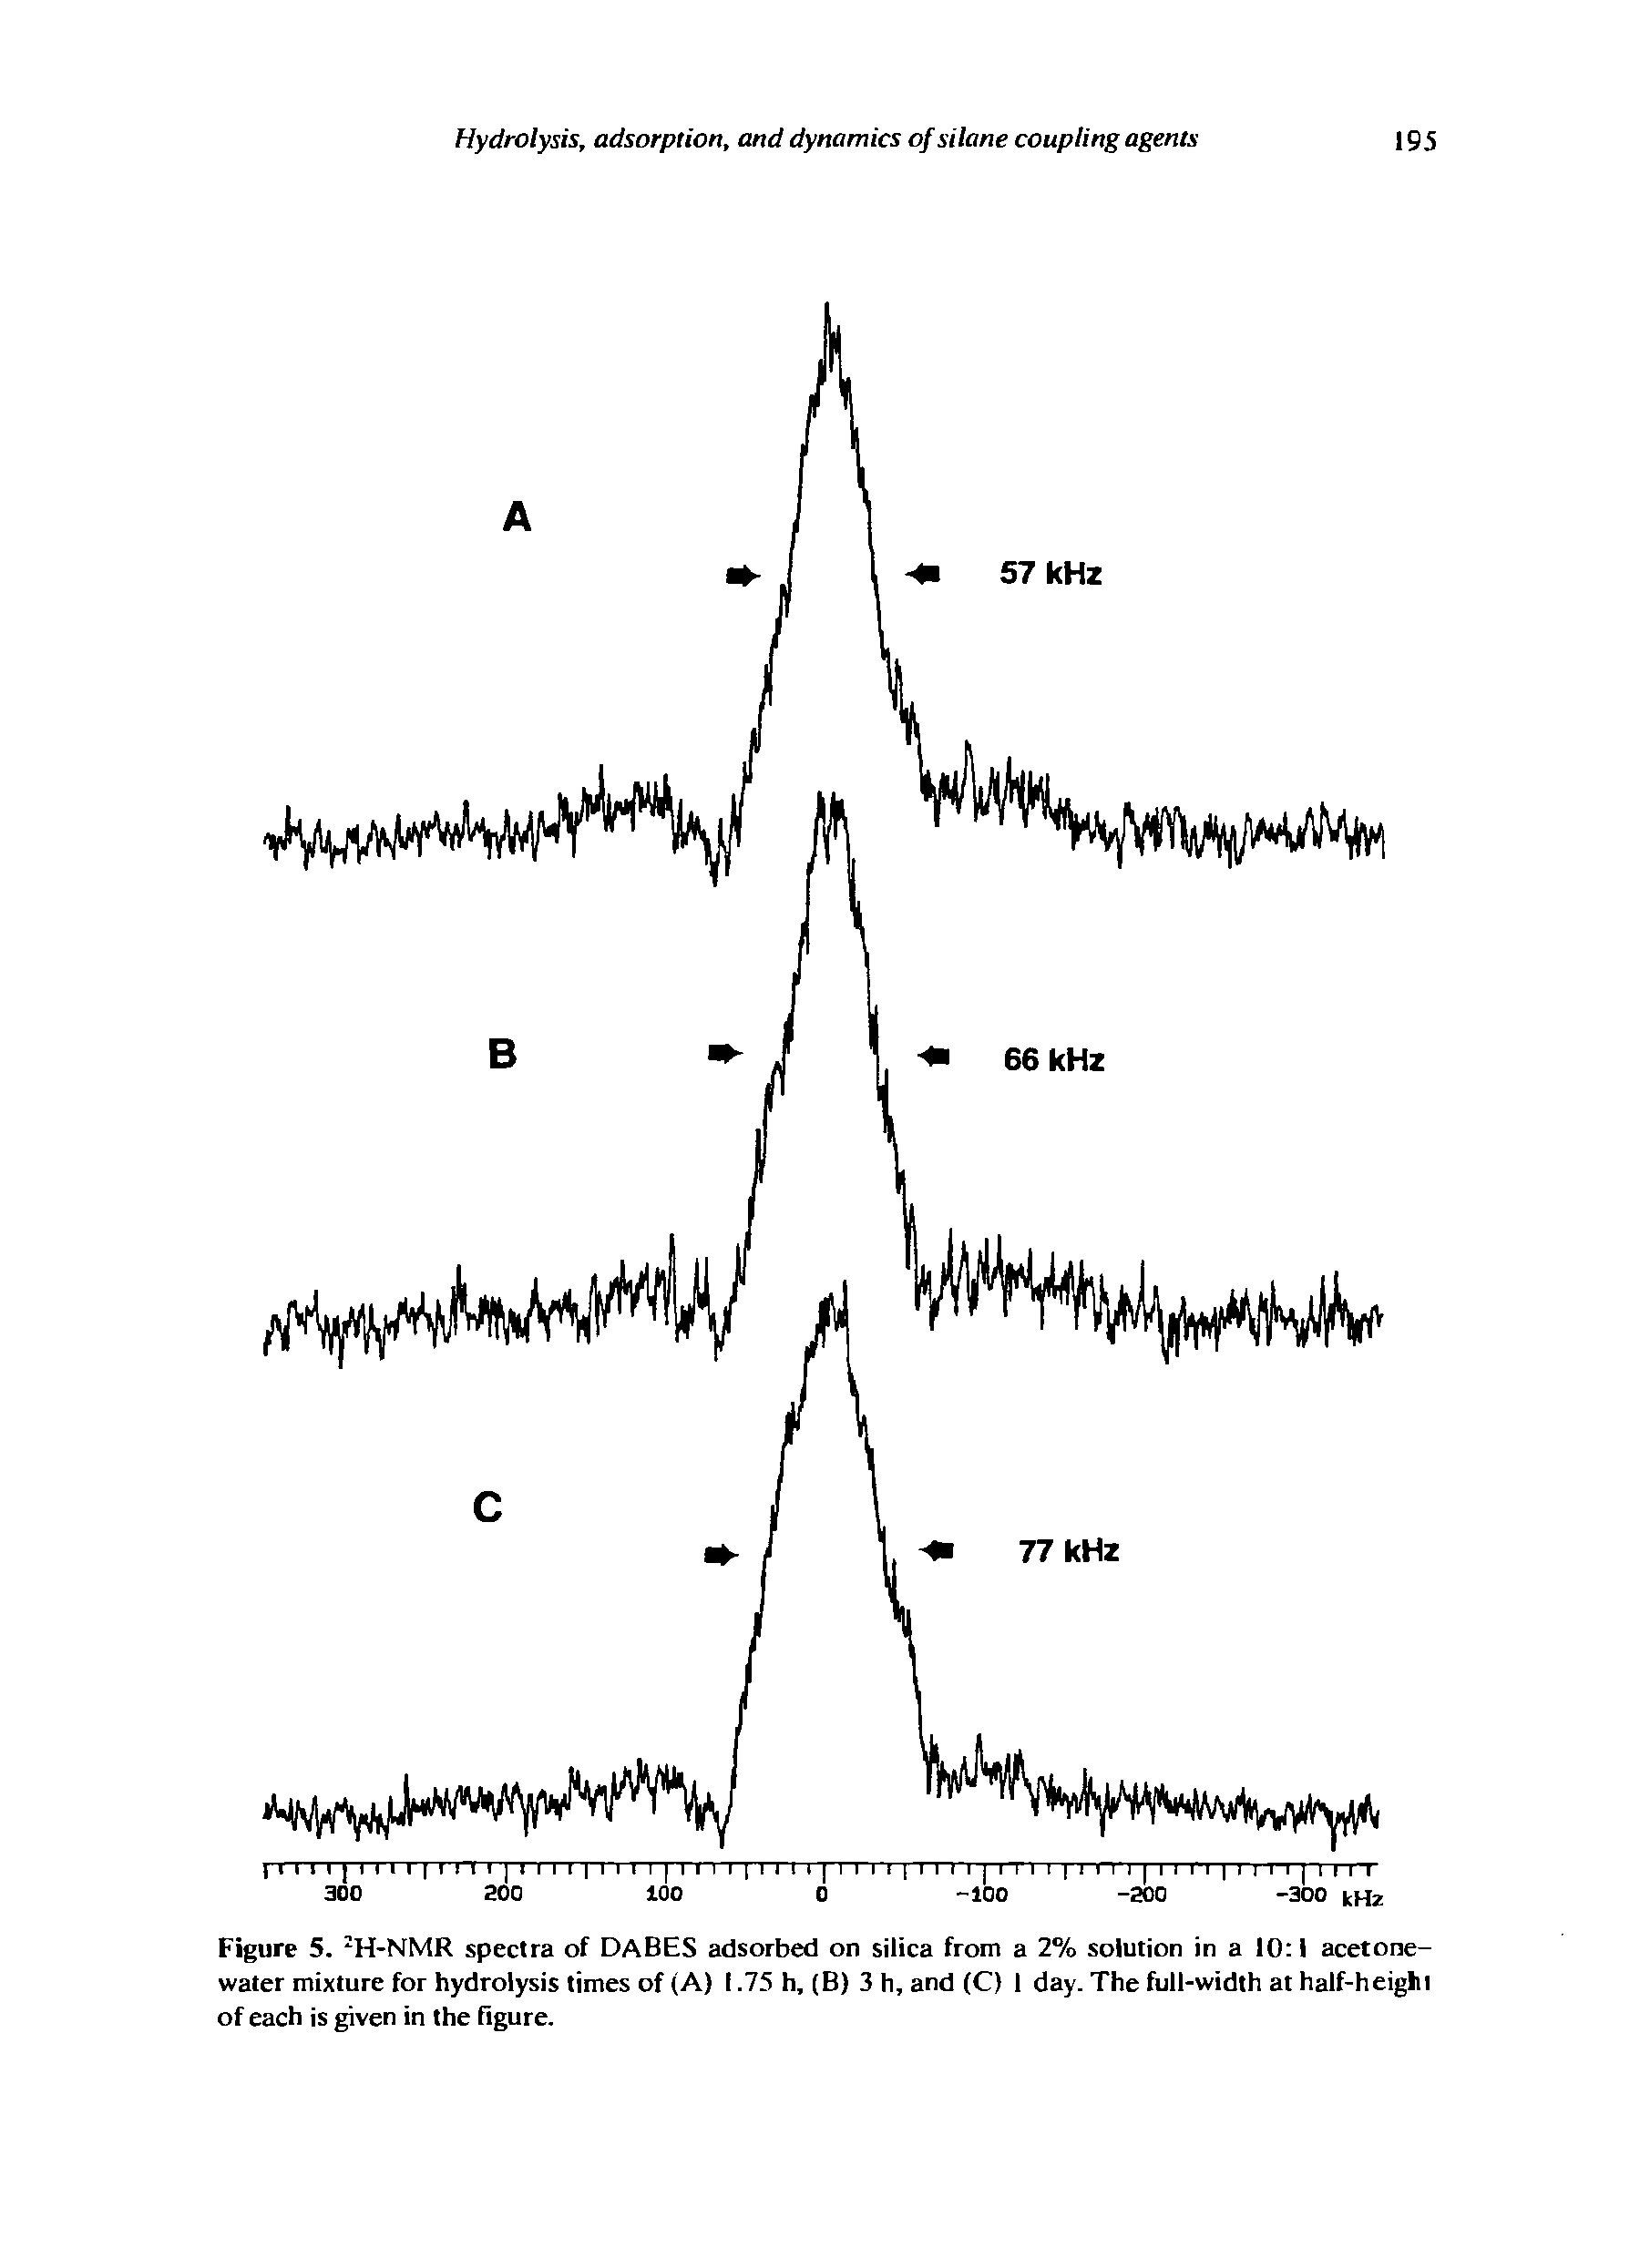 Figure 5. 2H-NMR spectra of DABES adsorbed on silica from a 2% solution in a 10 1 acetone-water mixture for hydrolysis times of (A) 1.75 h, (B) 3 h, and (C) 1 day. The full-width at half-heighi of each is given in the Figure.